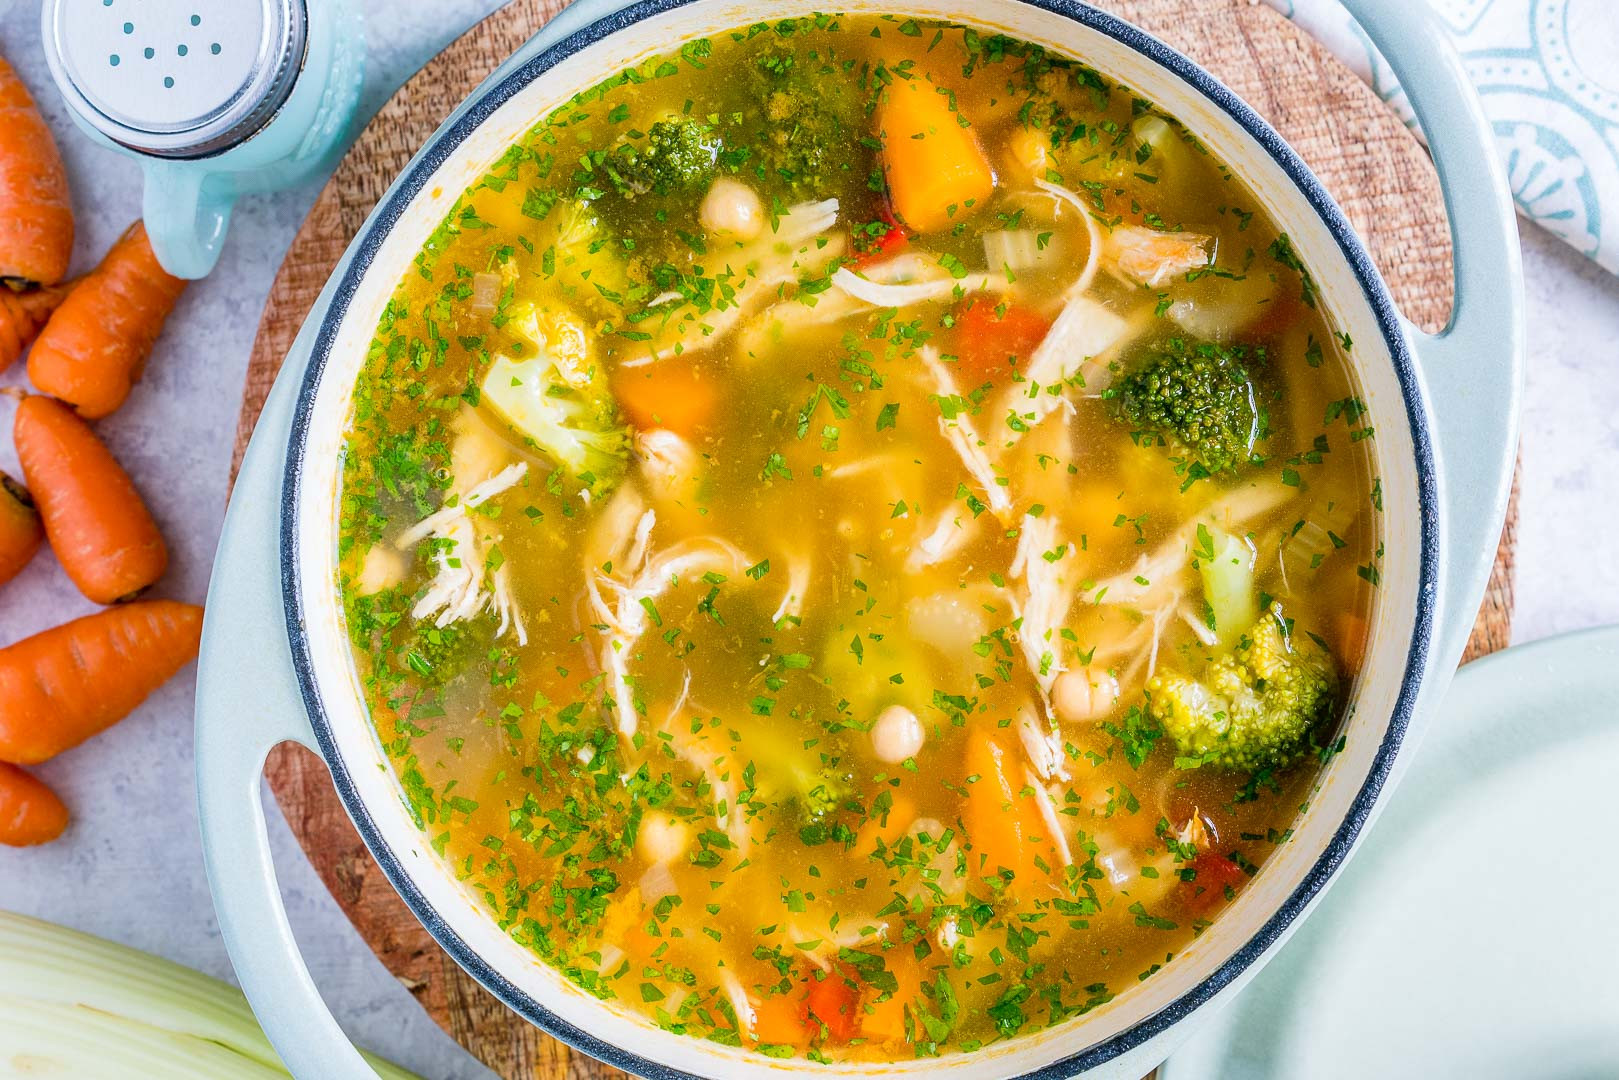 Chicken Soup Recipe
 Eat this Detox Soup to Lower Inflammation and Shed Water